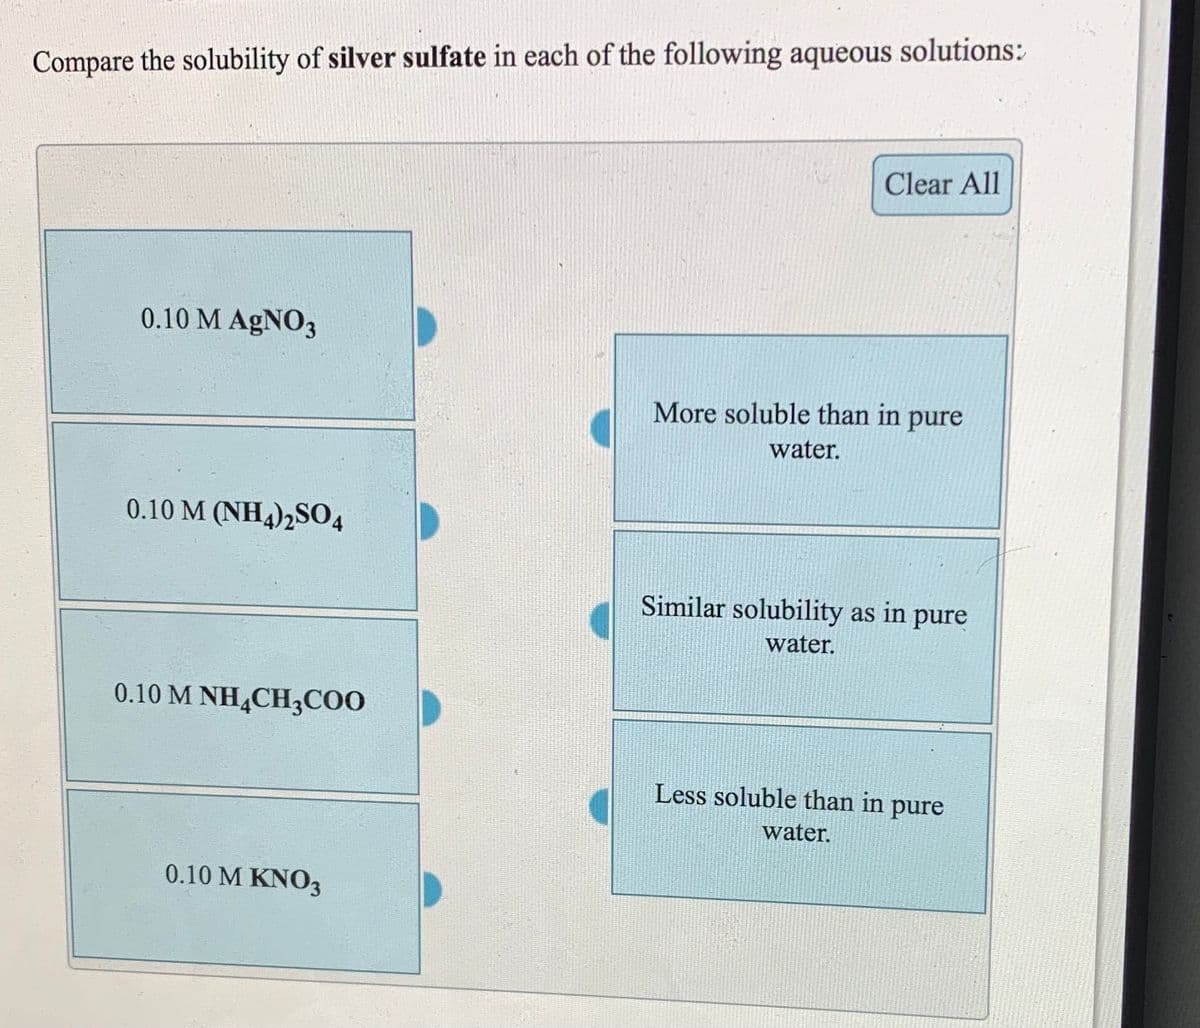 Compare the solubility of silver sulfate in each of the following aqueous solutions:
Clear All
0.10 M AGNO3
More soluble than in pure
water.
0.10 M (NH4)2SO4
Similar solubility as in pure
water.
0.10 M NH,CH,COO
Less soluble than in pure
water.
0.10 M KNO3
